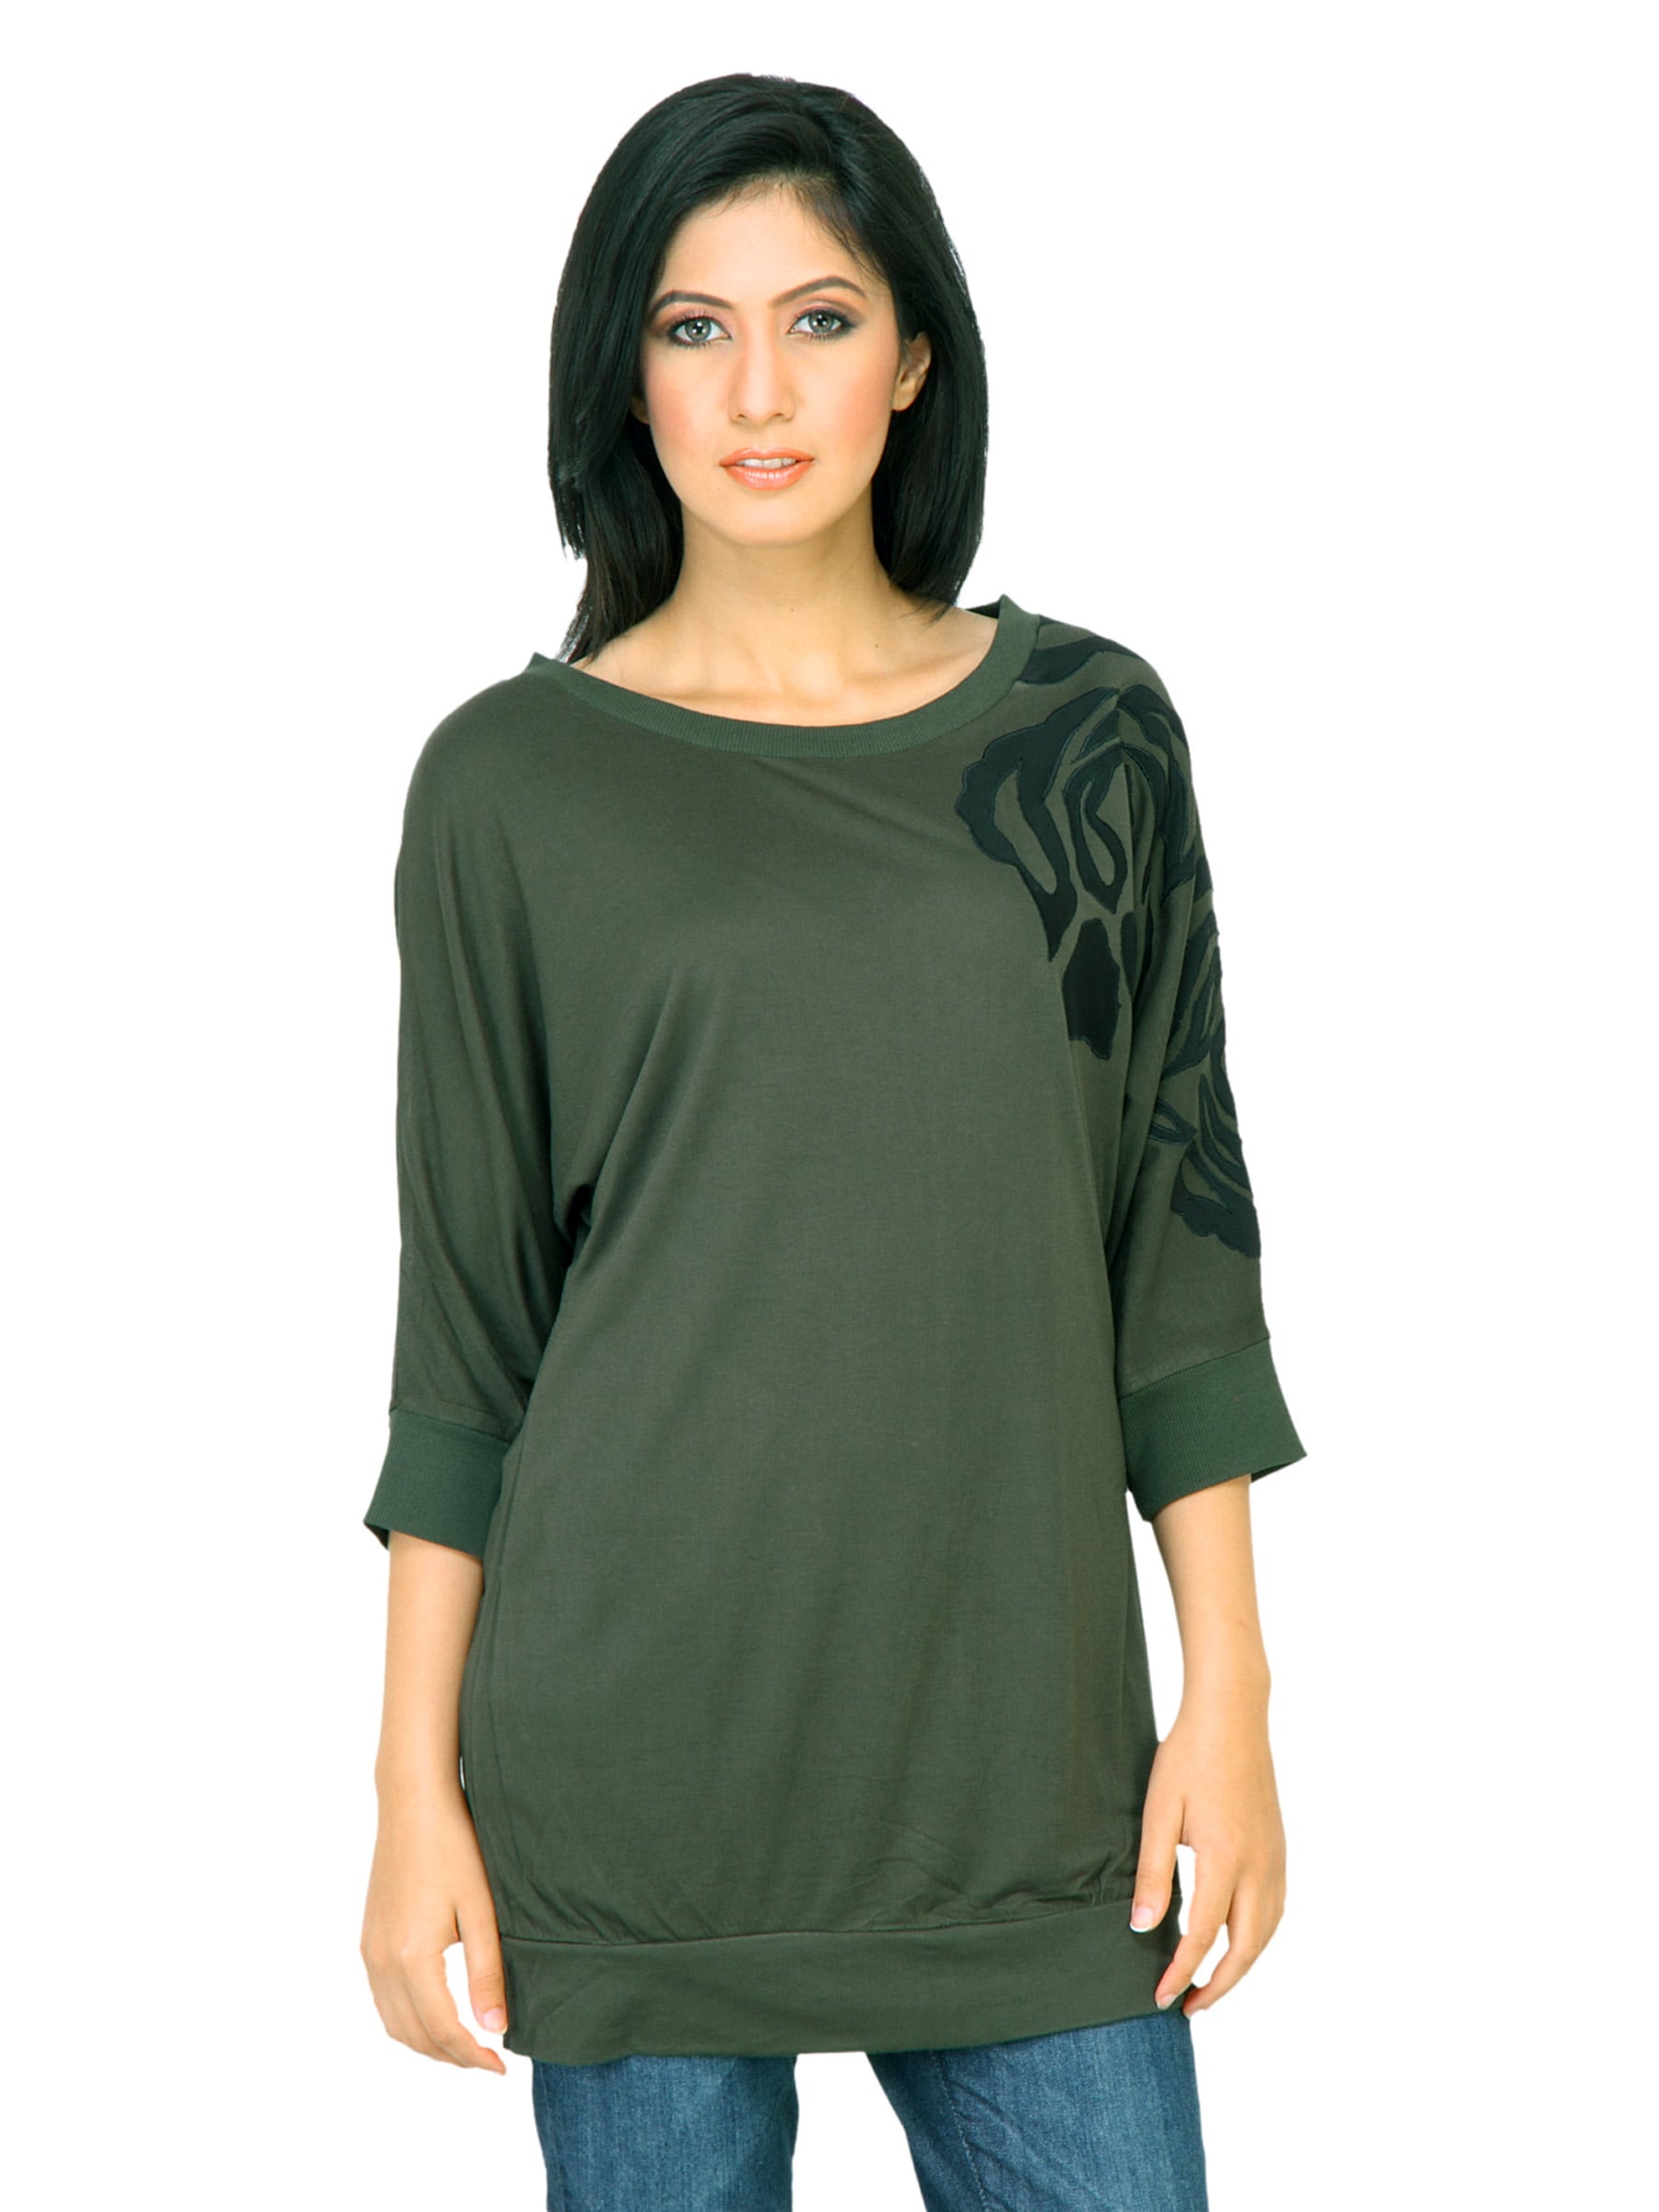 United Colors of Benetton Women Printed Green Tops